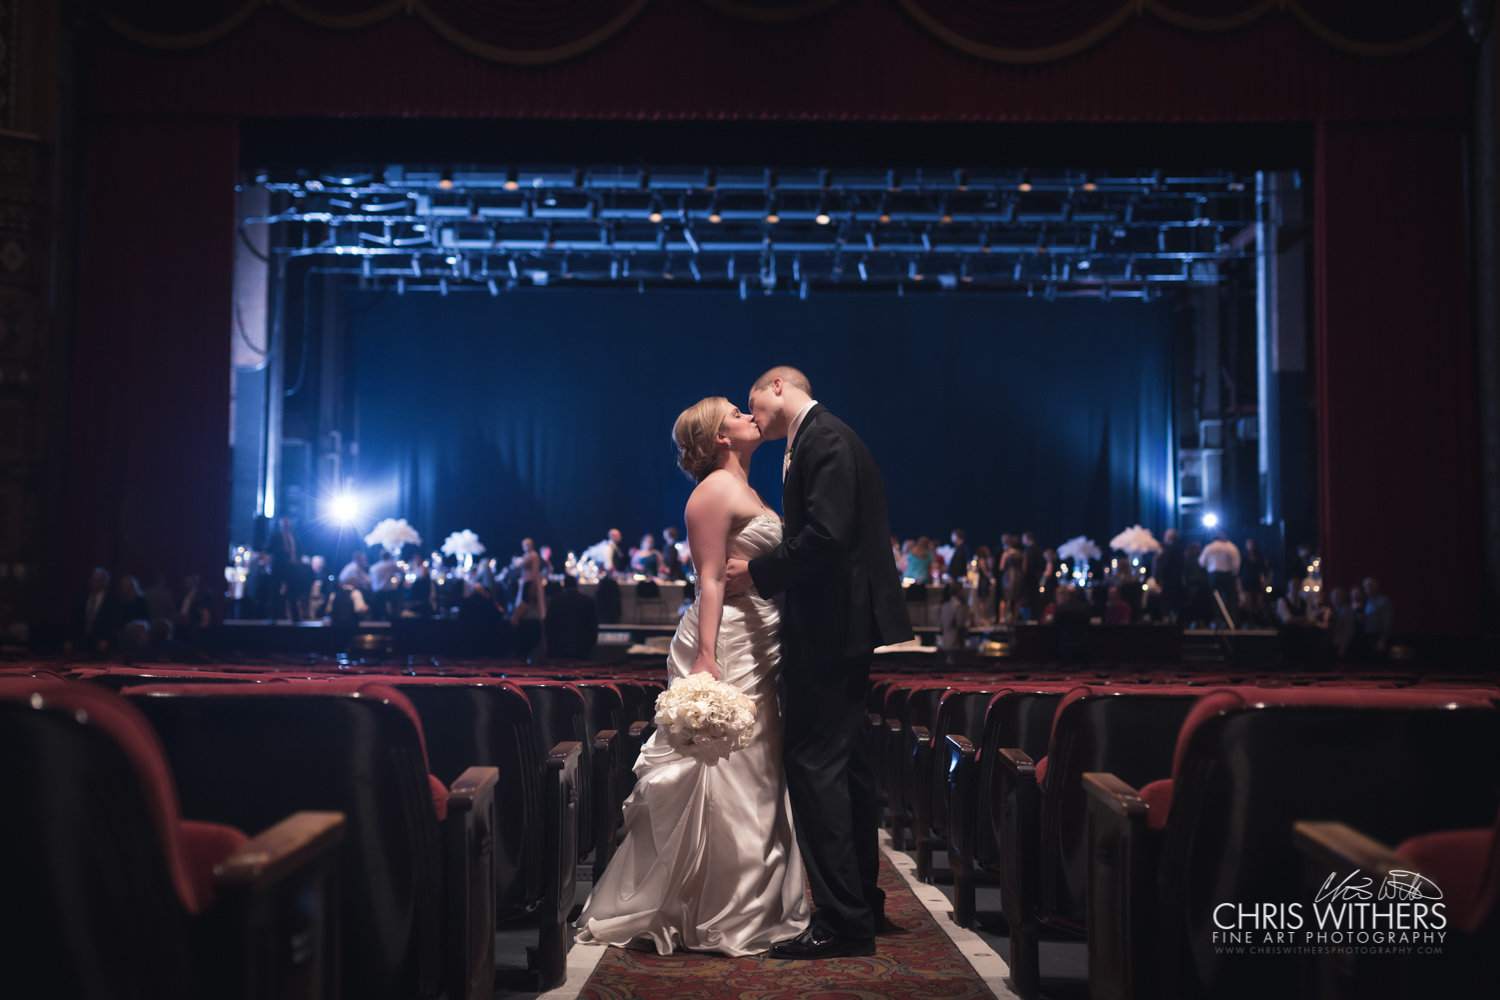 Chris Withers Photography - Springfield, IL Photographer-445